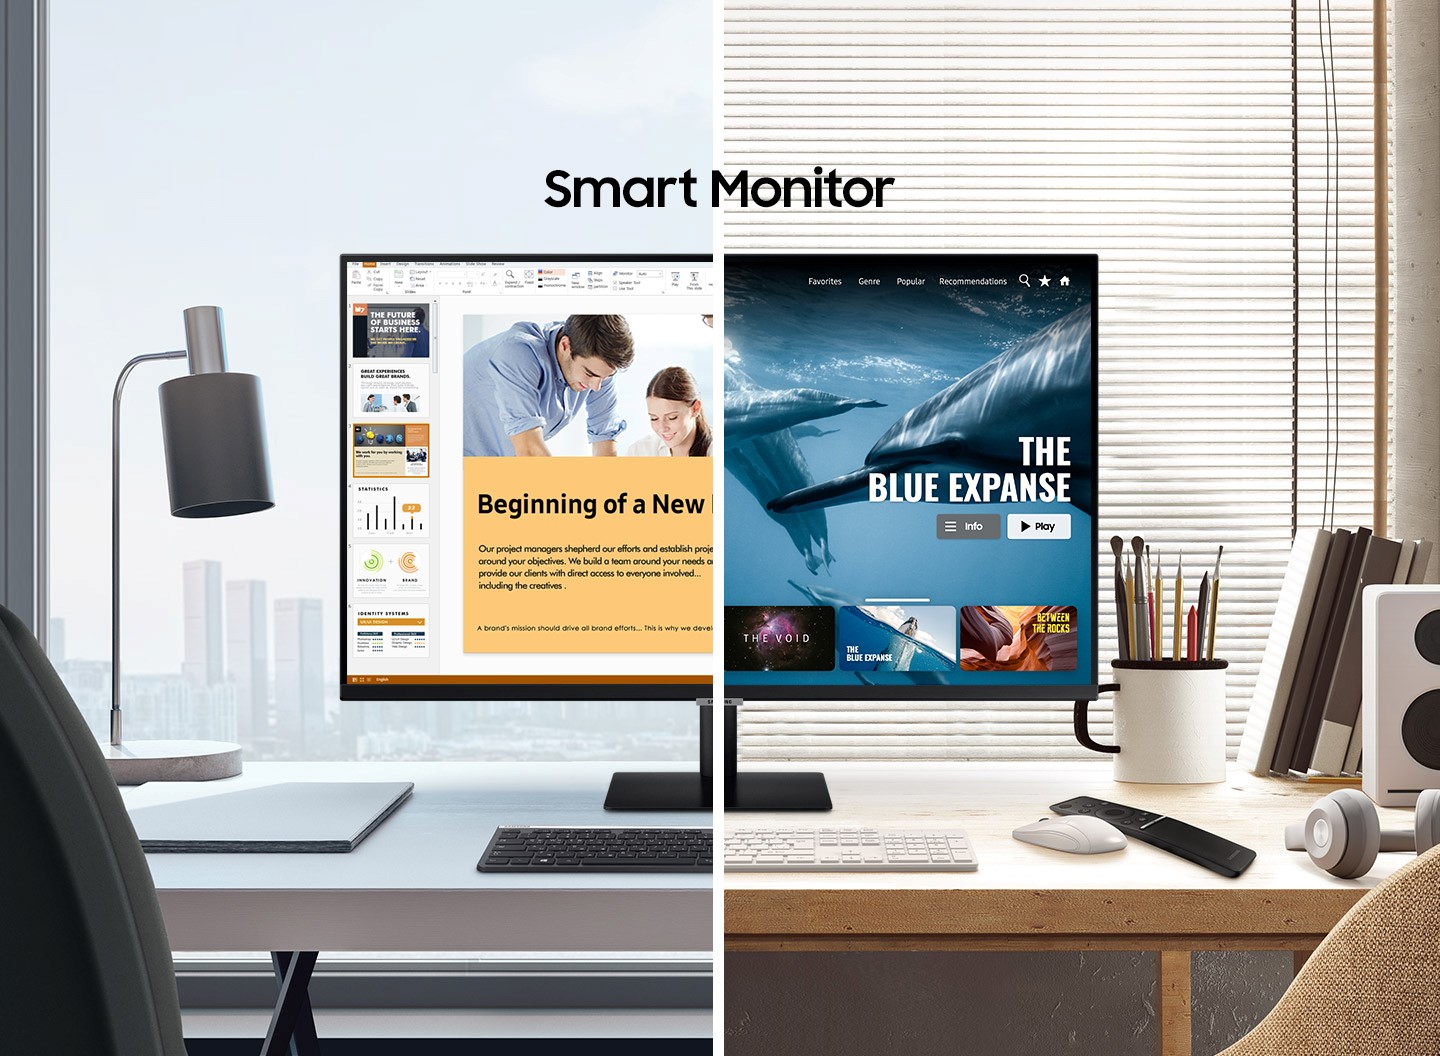 What is the Samsung Smart Monitor?